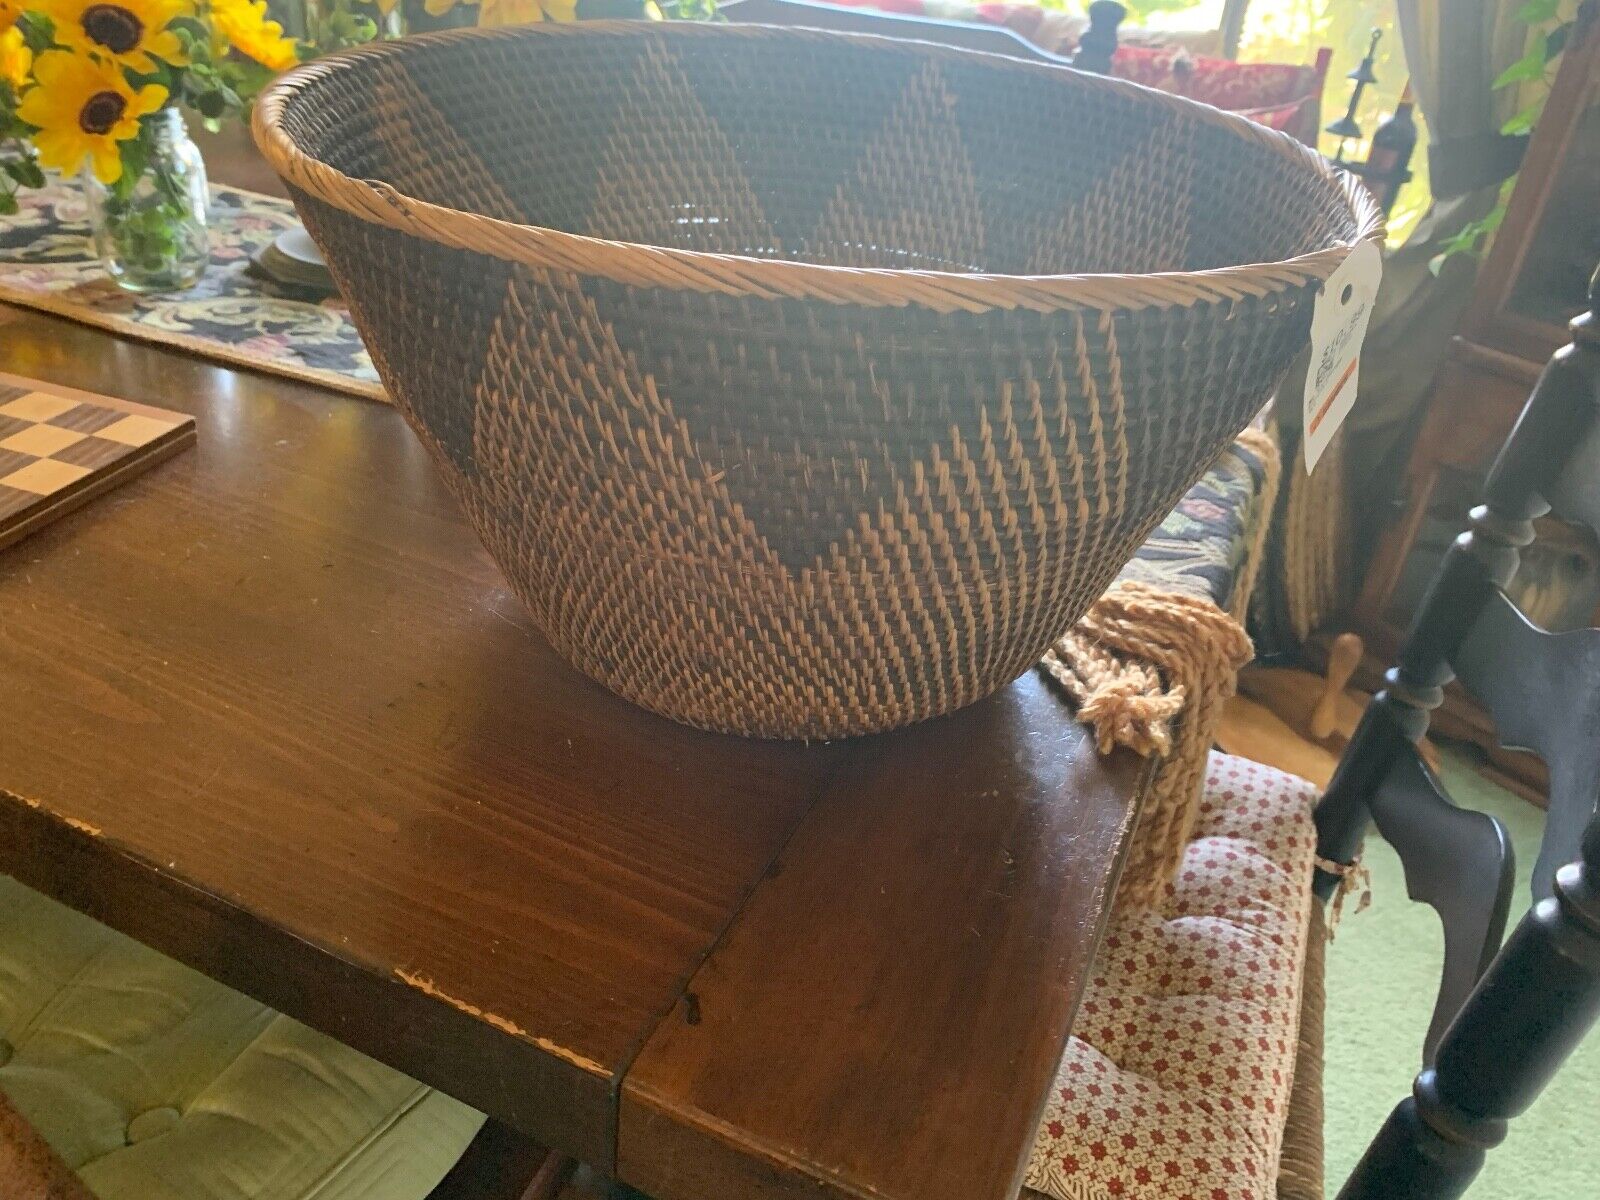 INDONESIN ROUND  Woven Basket - 17 x 10 inches-GEOMETRIC